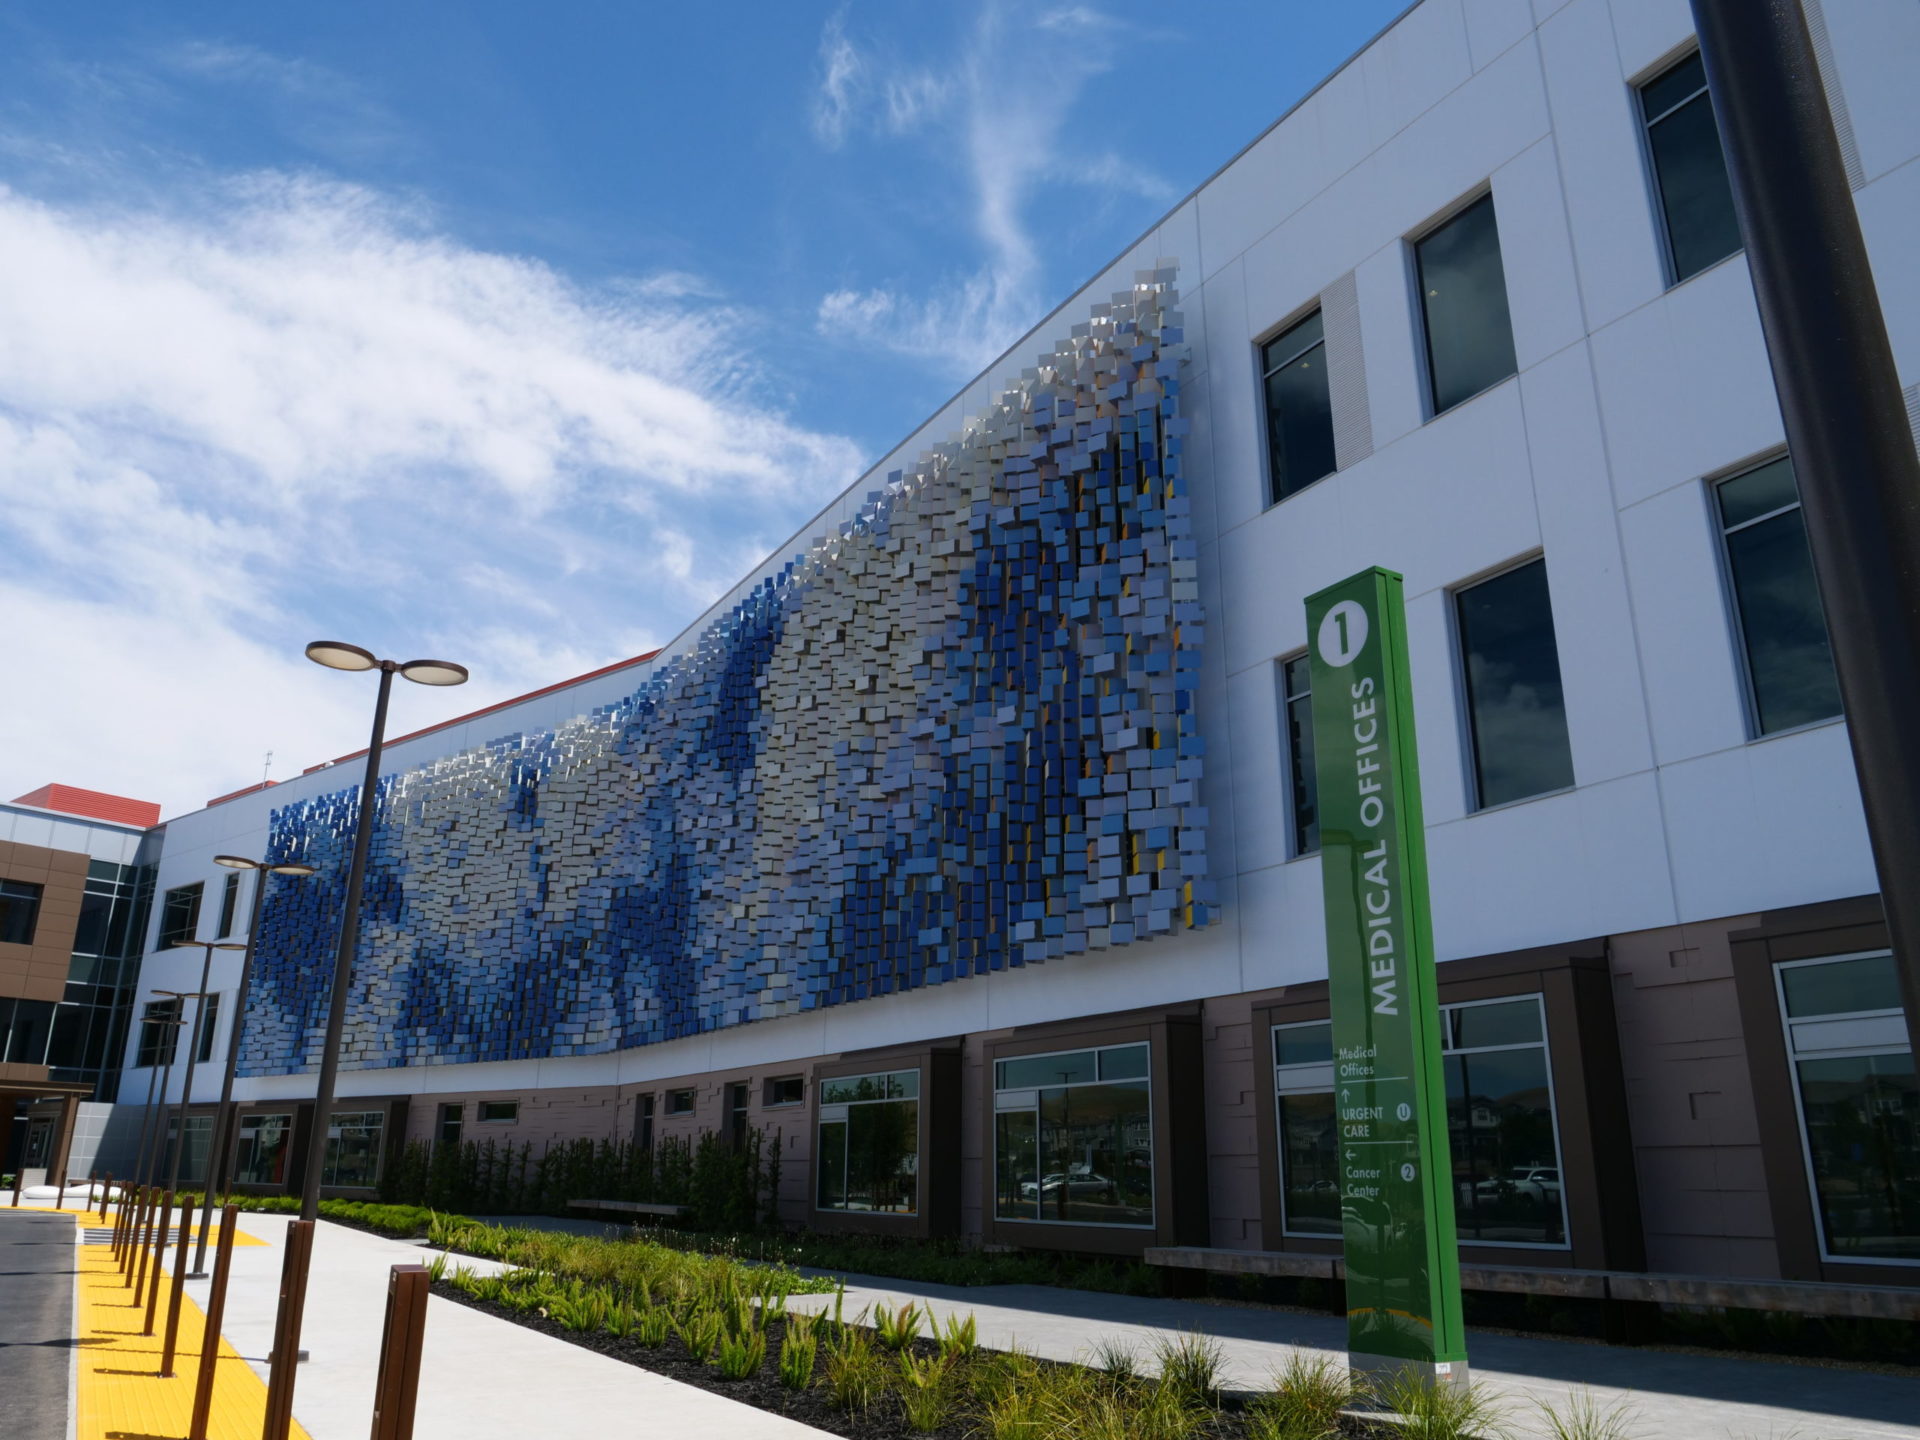 Image from the Gallery: Kaiser Permanente – Dublin, CA